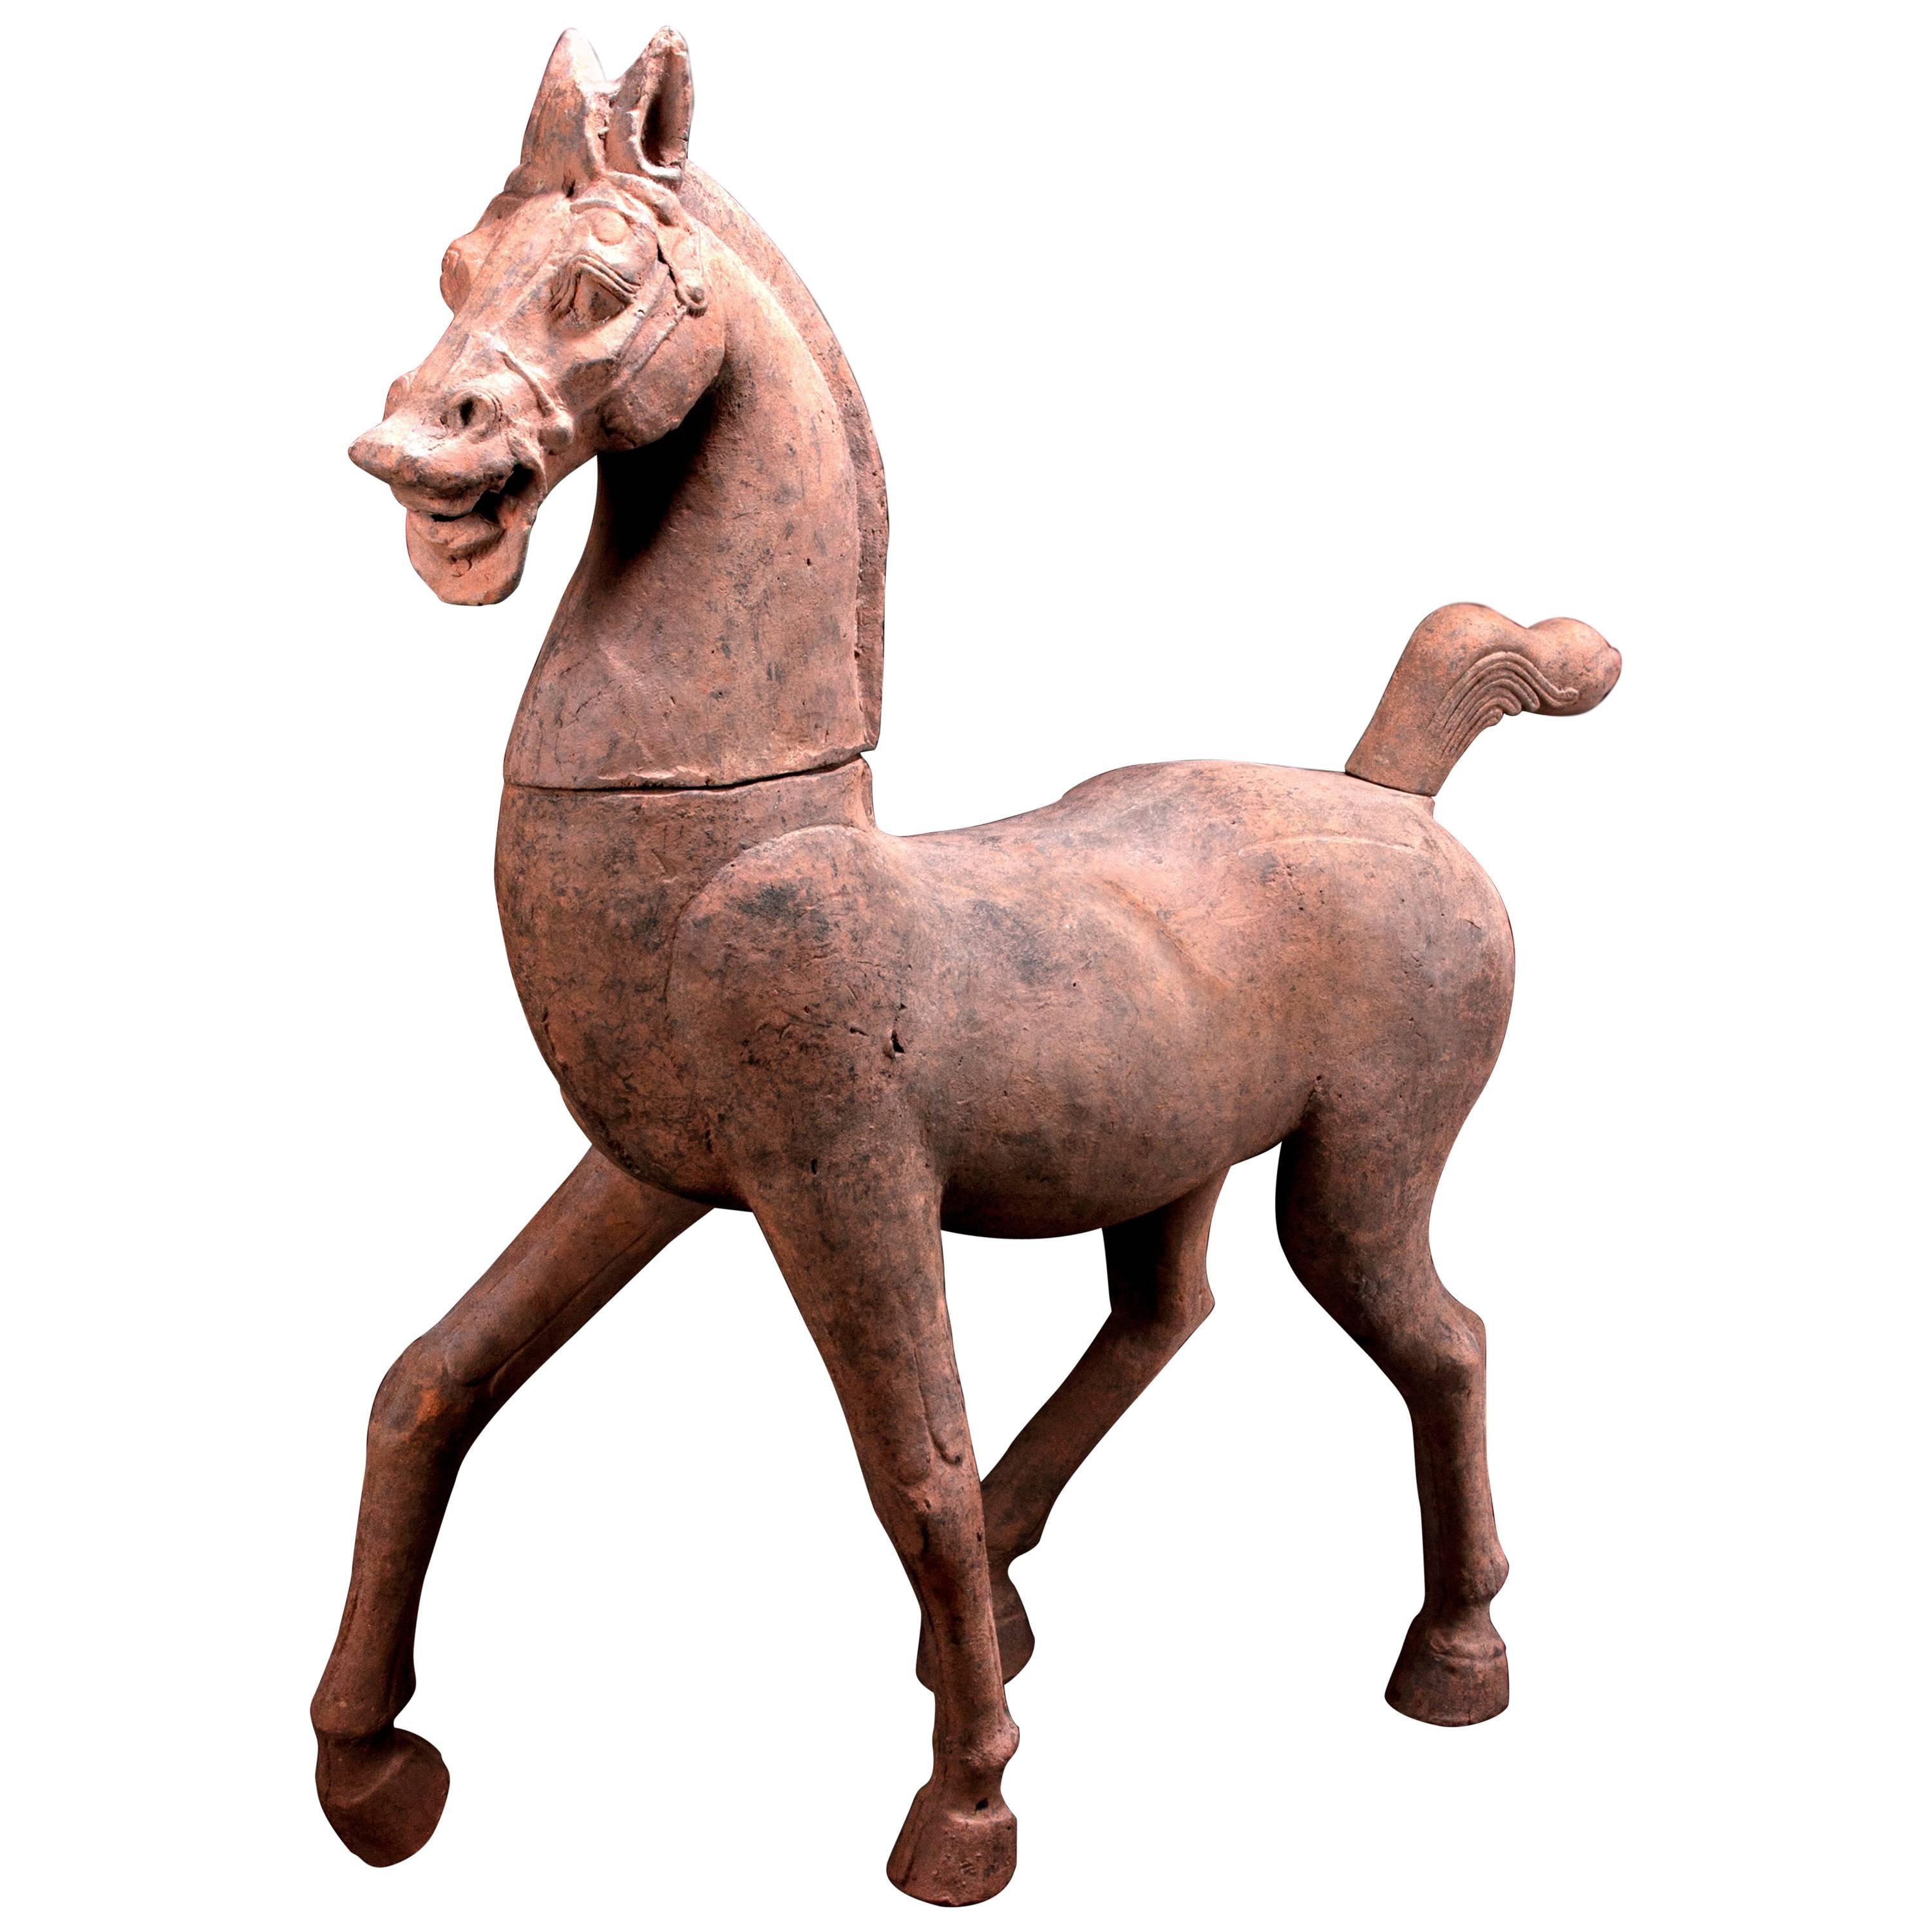 Monumental Han Dynasty Terracotta Horse - TL Tested - China, '206 BC–220 AD'